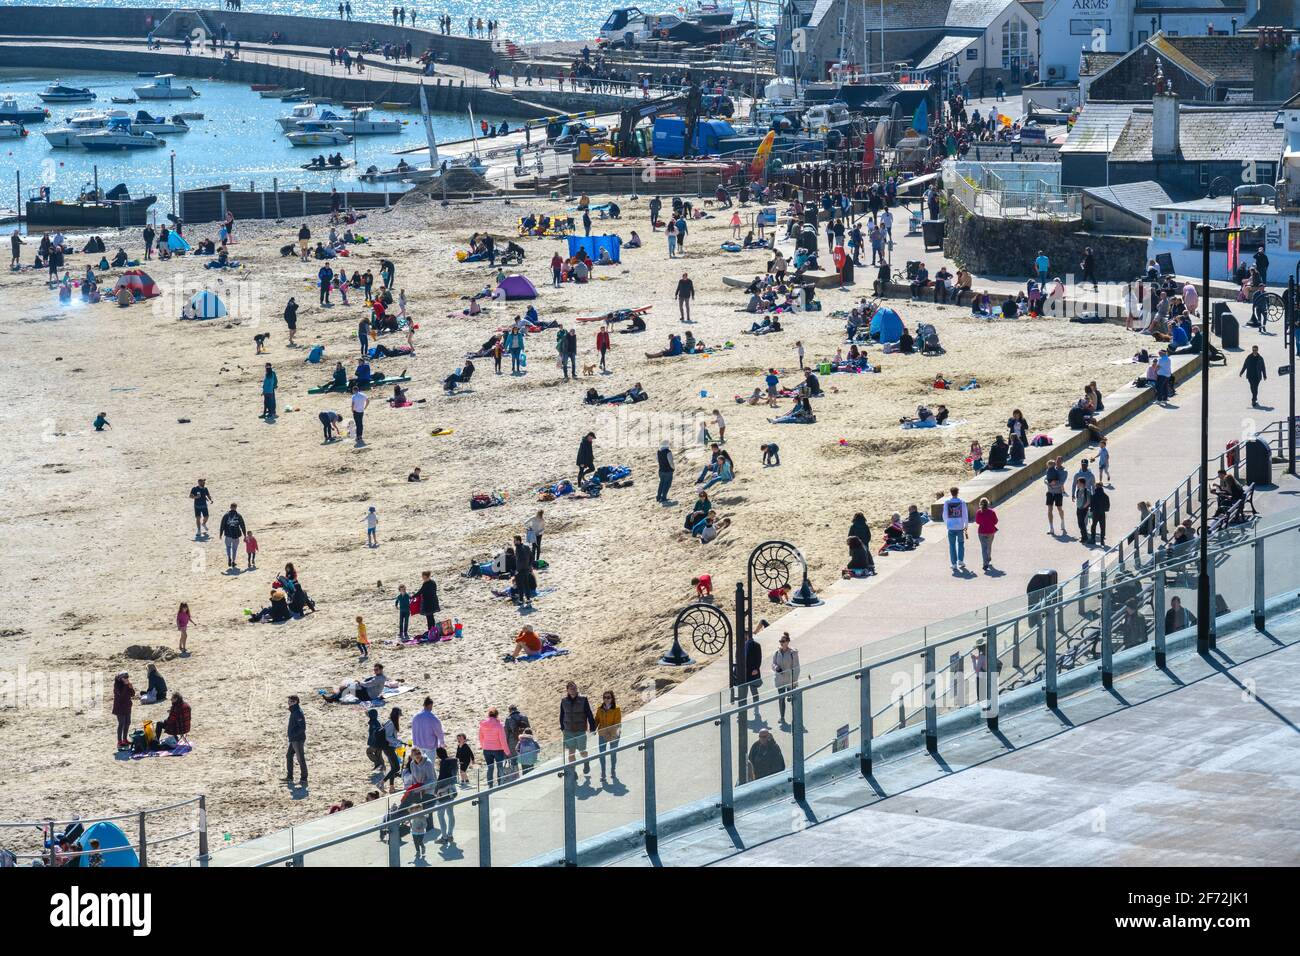 Lyme Regis, Dorset, UK. 4th Apr, 2021. UK Weather. Easter Sunday: Crowds flock to the pictureseque beach at the seaside resort of Lyme Regis on Easter Sunday Bank Holiday to make the best of the balmy sunshine and blue skies before temperatures plunge next week. Credit: Celia McMahon/Alamy Live News Stock Photo